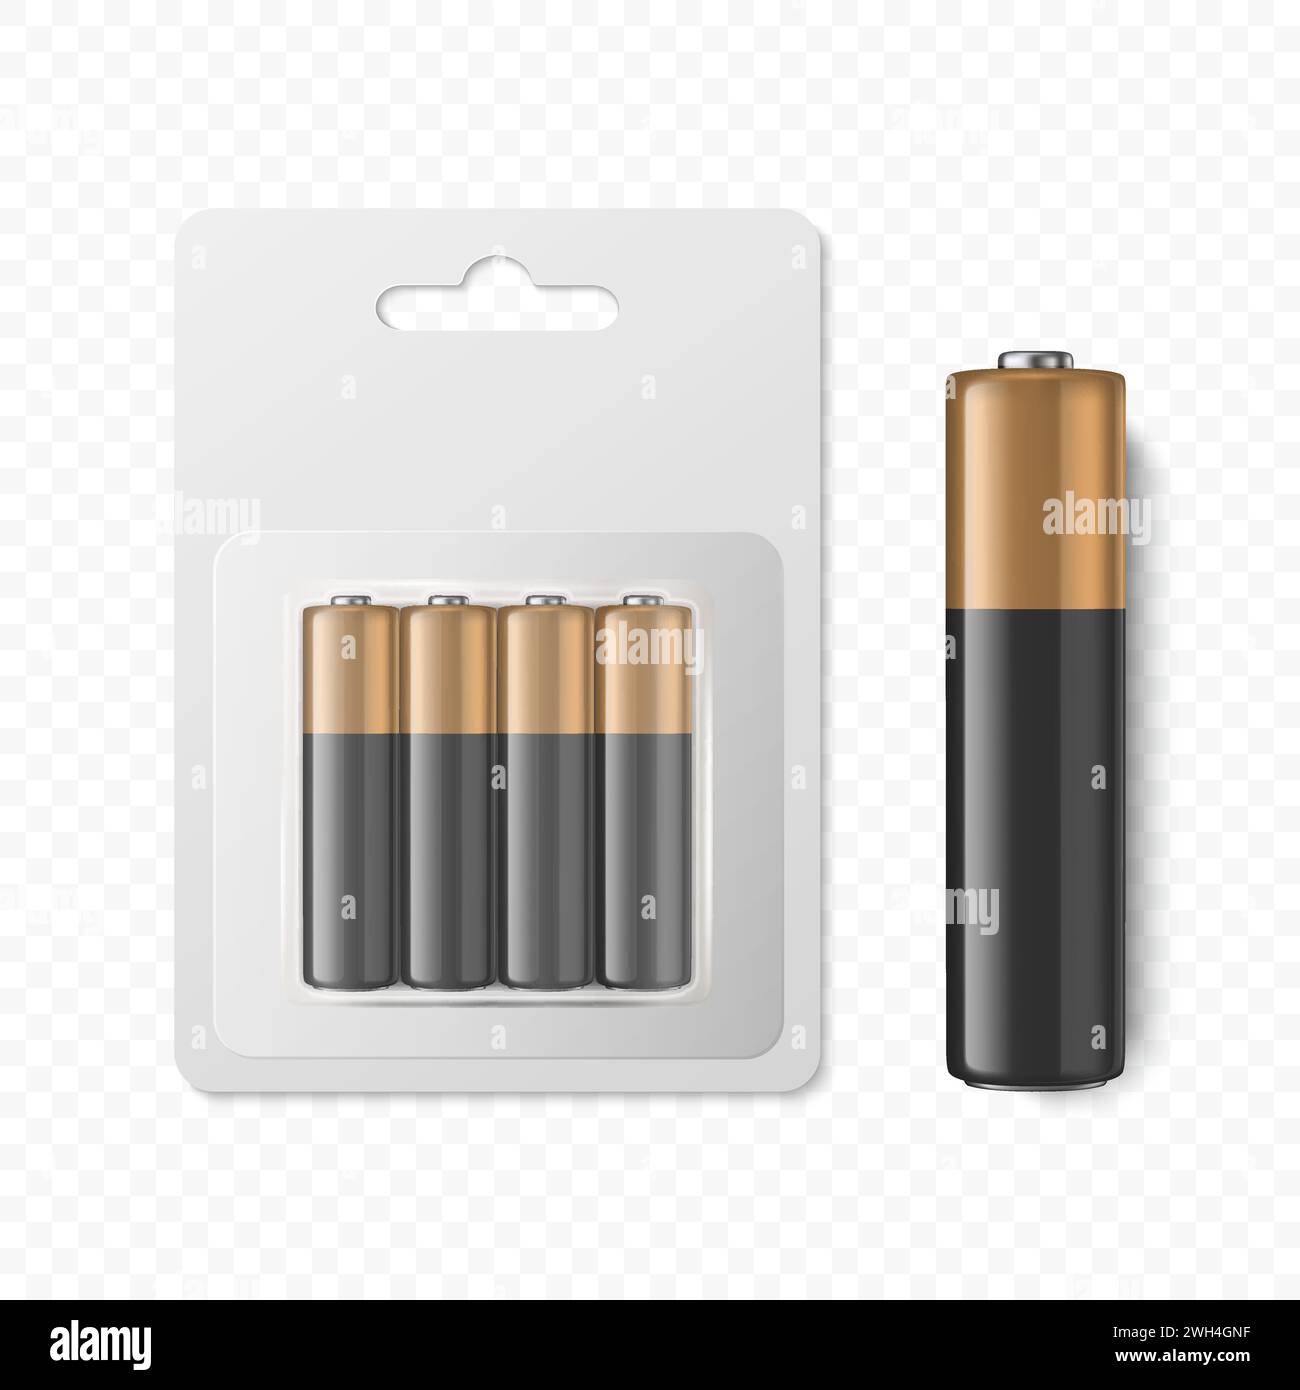 Vector 3D Realistic Alkaline Battery Set in Paper Blister Closeup Isolated. AA Size. Design Template for Branding and Mockup. Energy and Technology Stock Vector